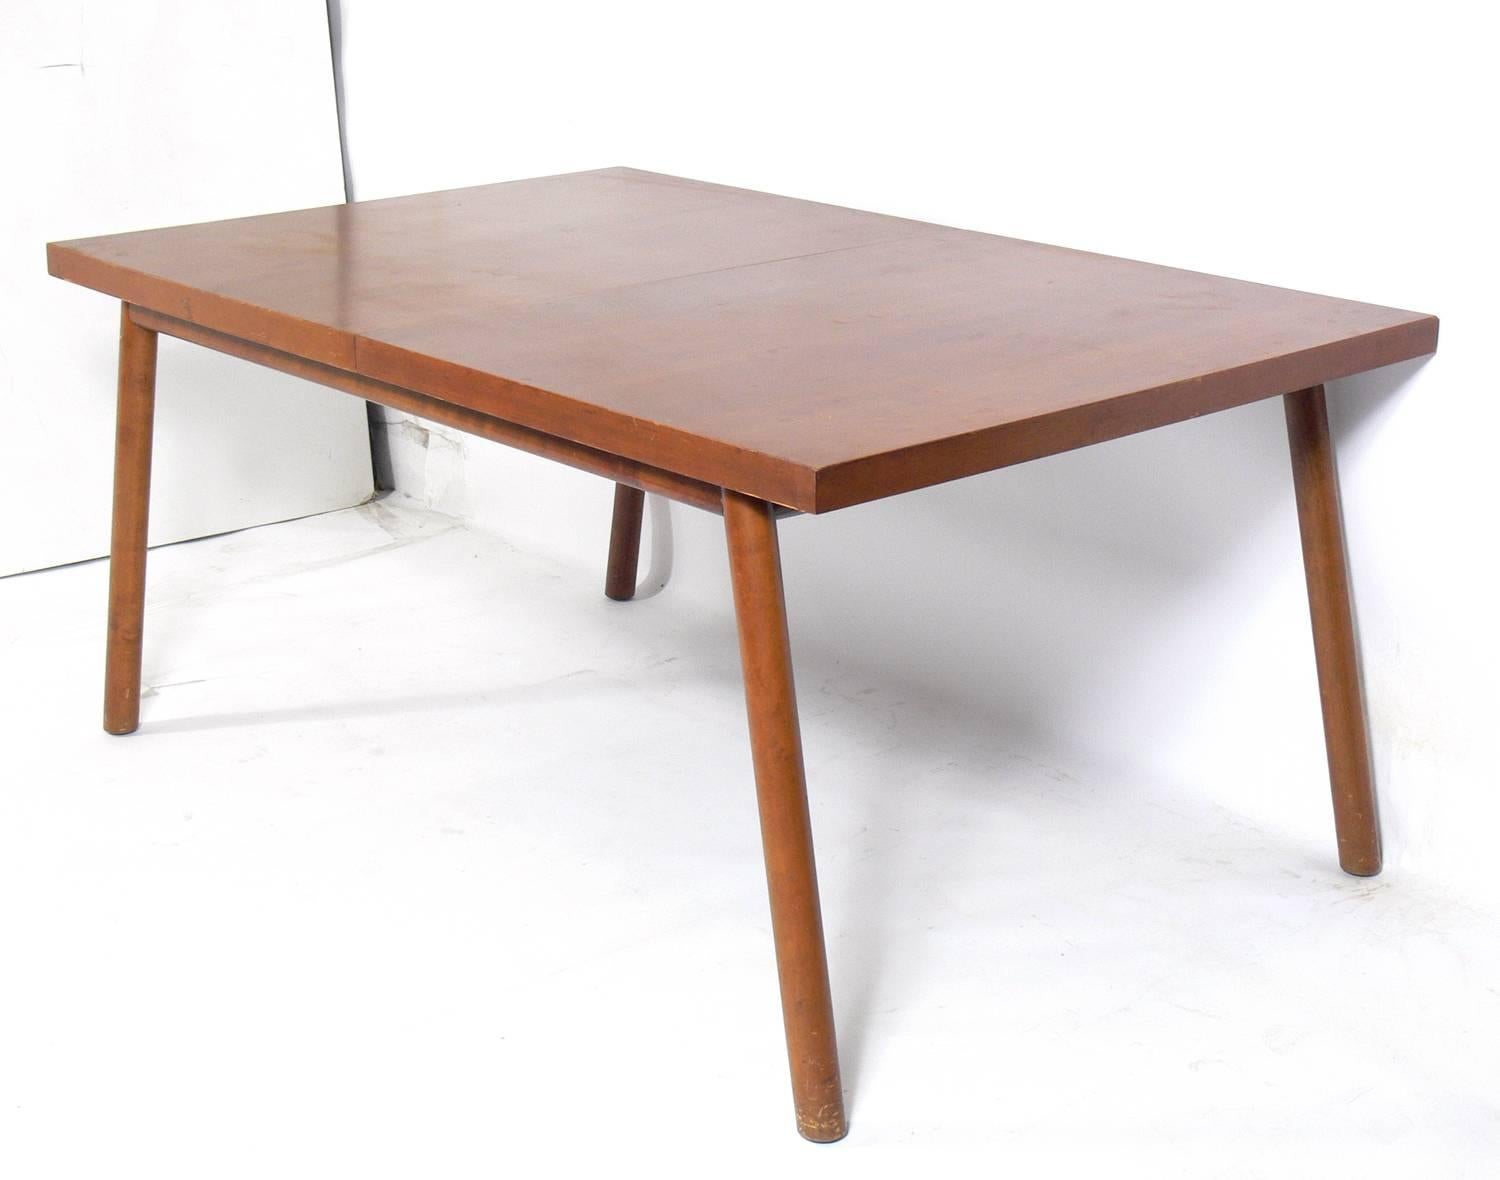 Clean lined dining table, designed by T.H. Robsjohn-Gibbings for Widdicomb, American, circa 1950s. It goes from a compact rectangle that measures 62